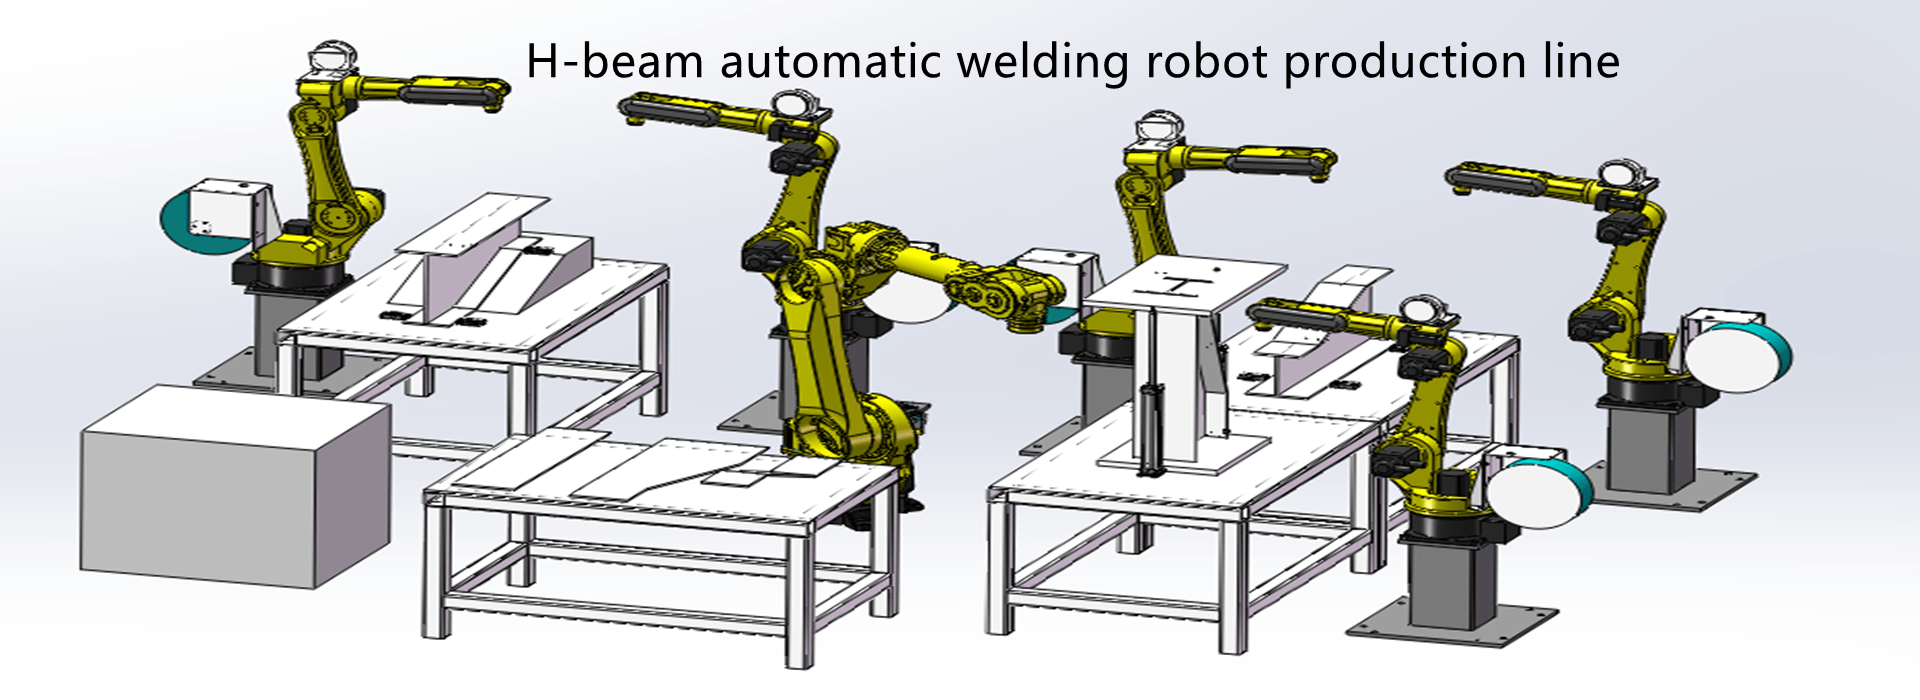 H-beam automatic welding robot production line